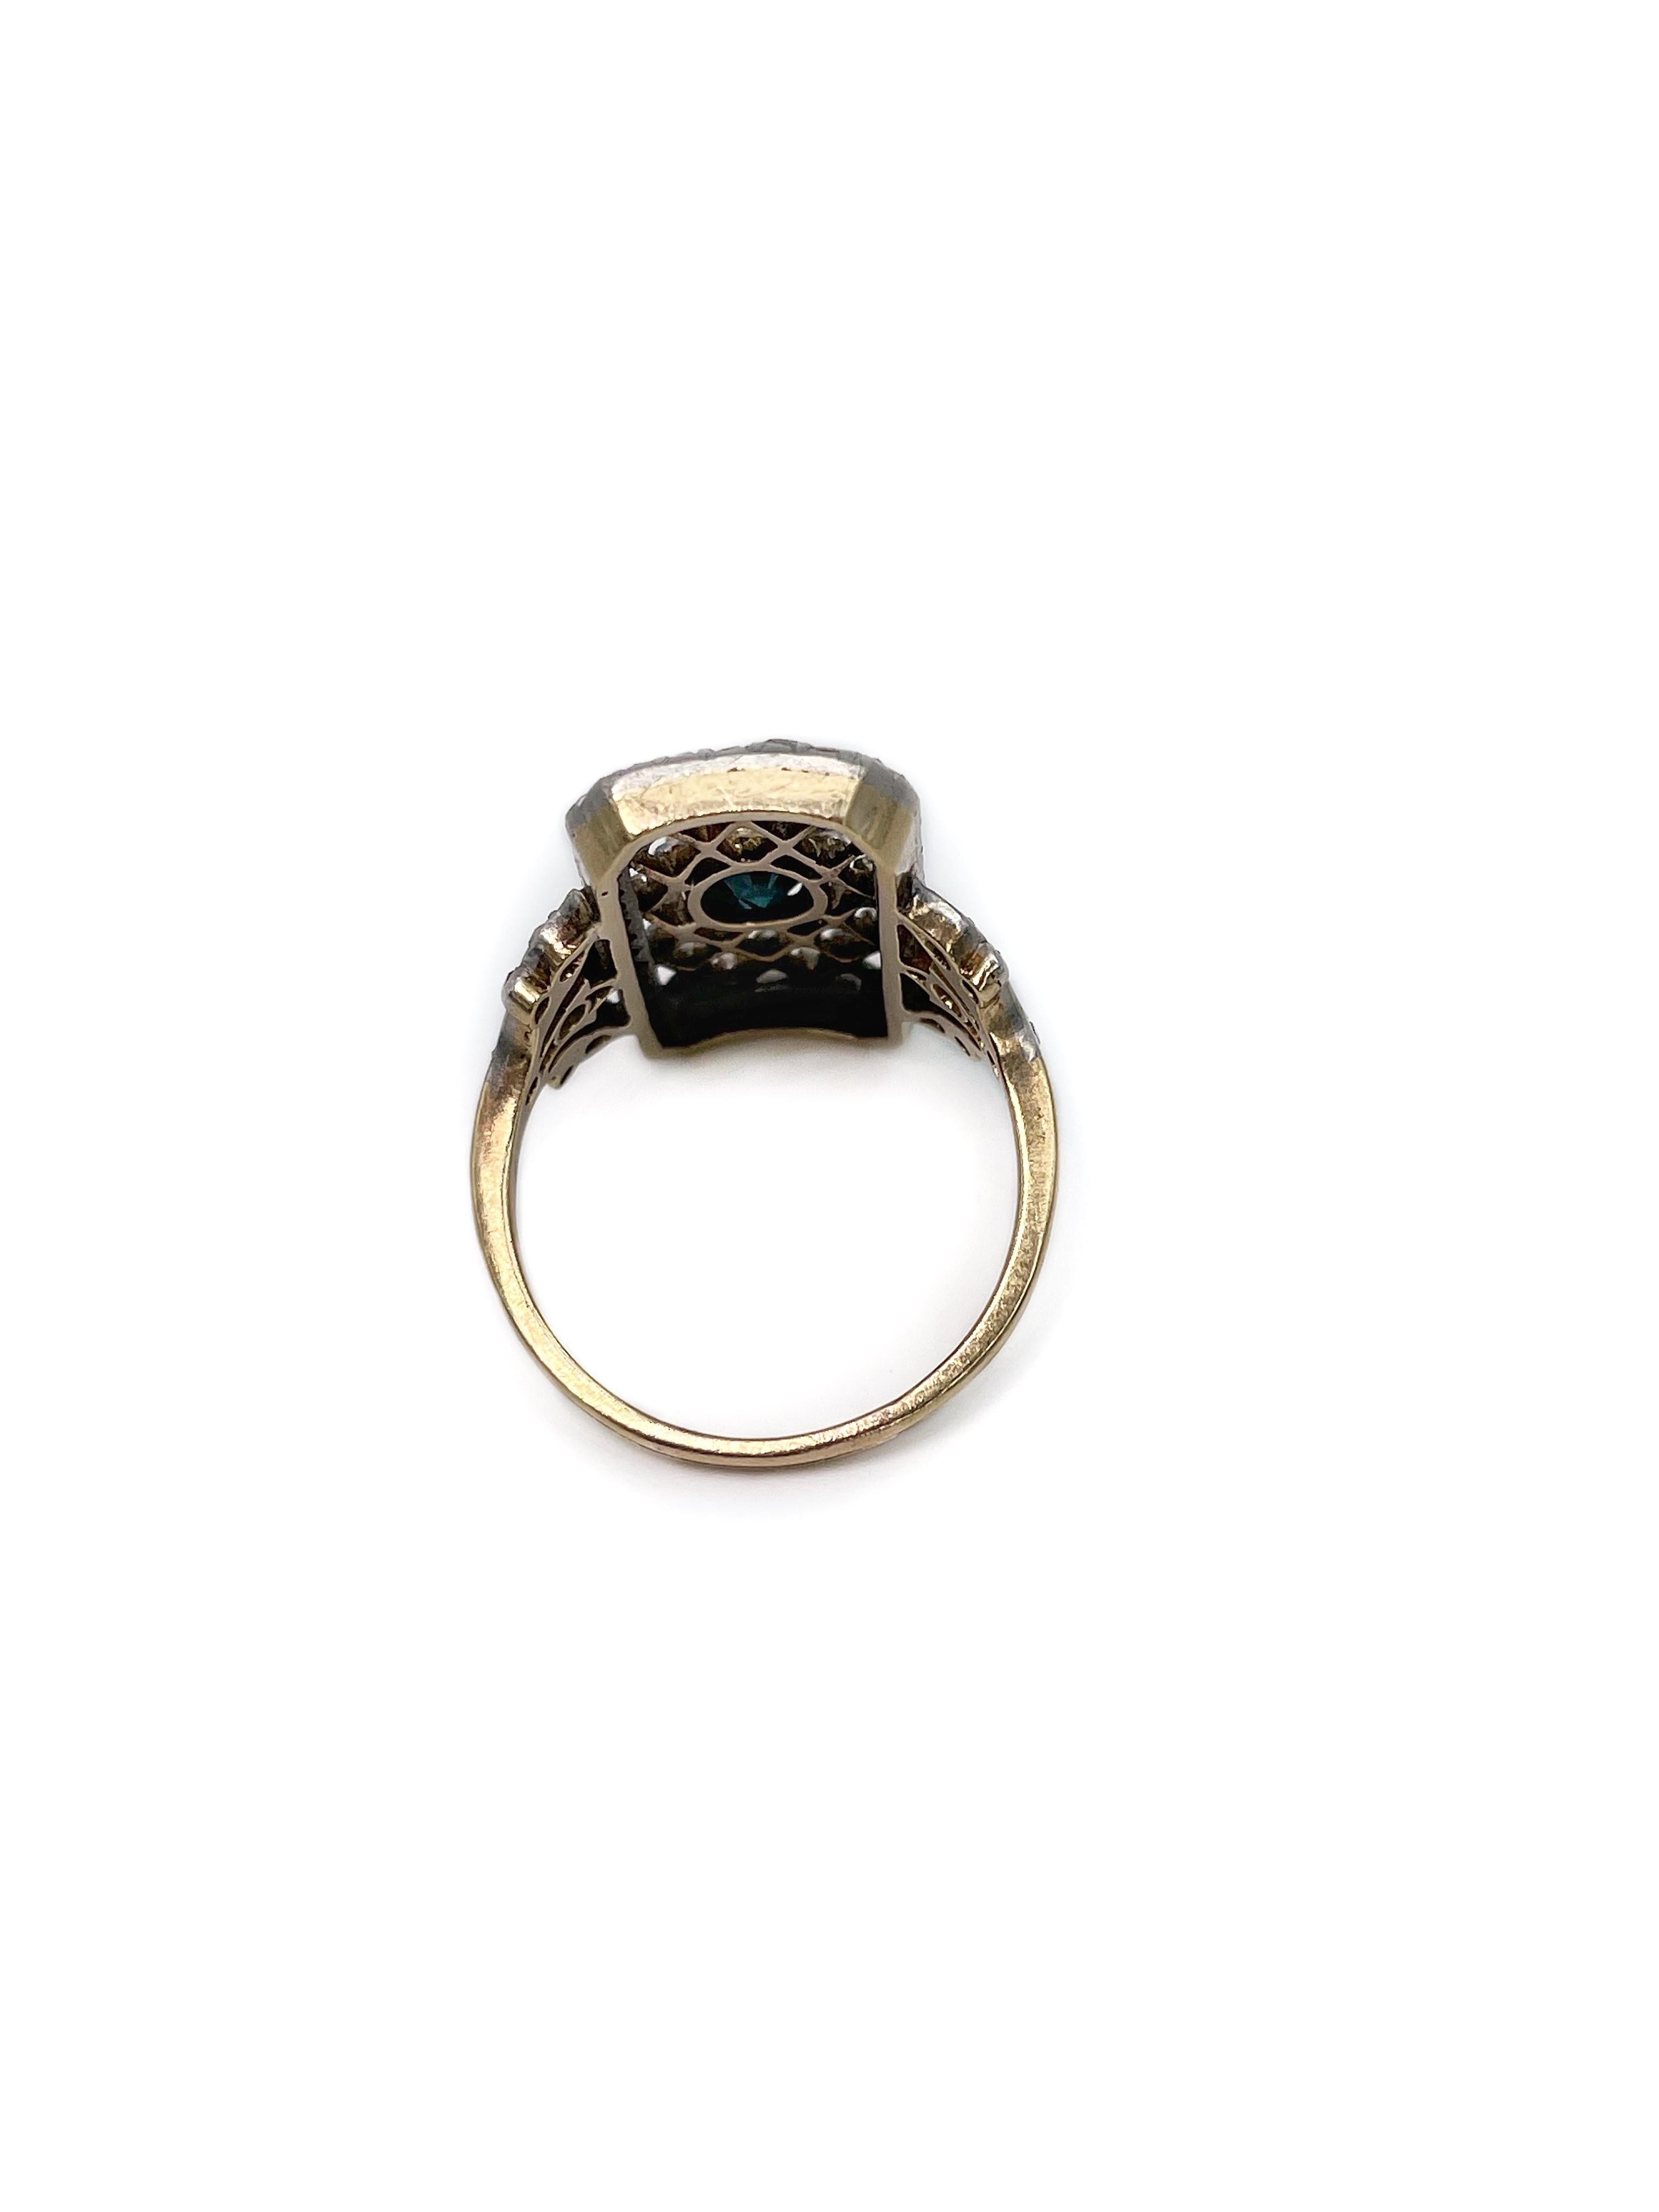 This is a stunning antique Victorian rectangle open wire work ring crafted in 18K gold and adorned with silver. 

The piece features:
- 1 pc. oval faceted sapphire (1.25ct, B 5/5, VS, H)
- 82 pcs. rose cut diamonds (0.19ct, RW-W, SI-P2)

Weight: